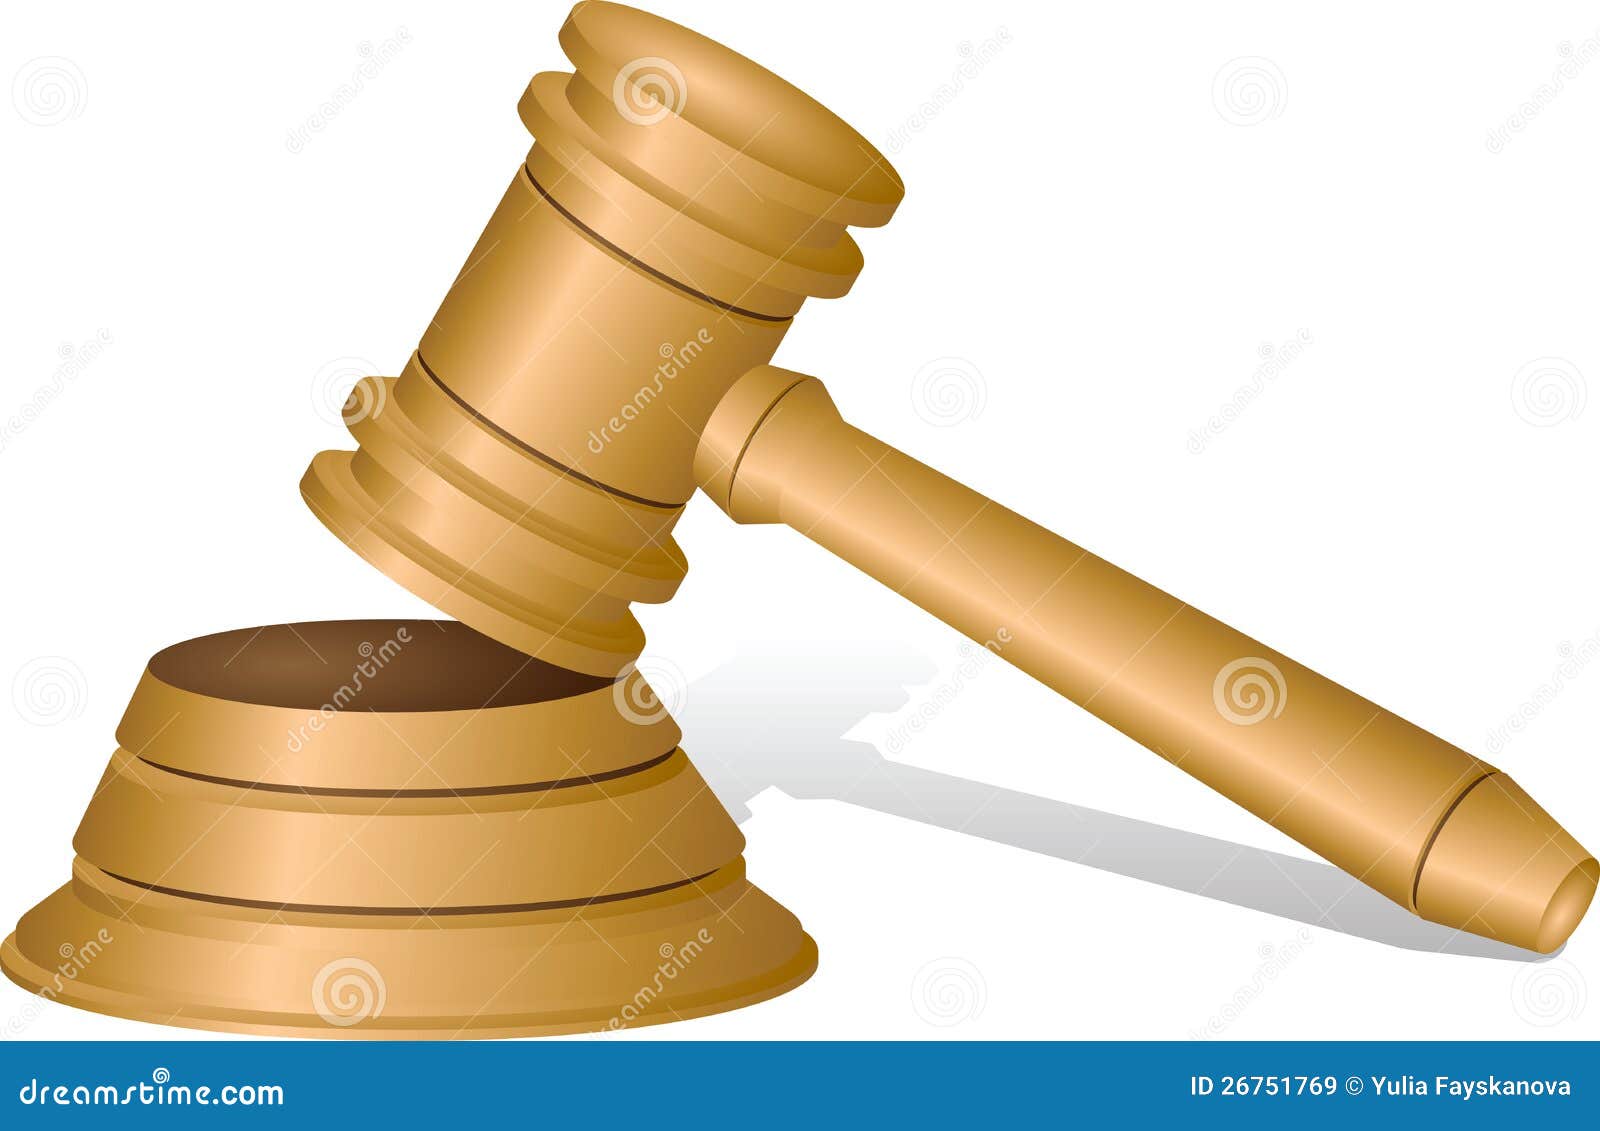 microsoft clip art scales of justice - photo #38